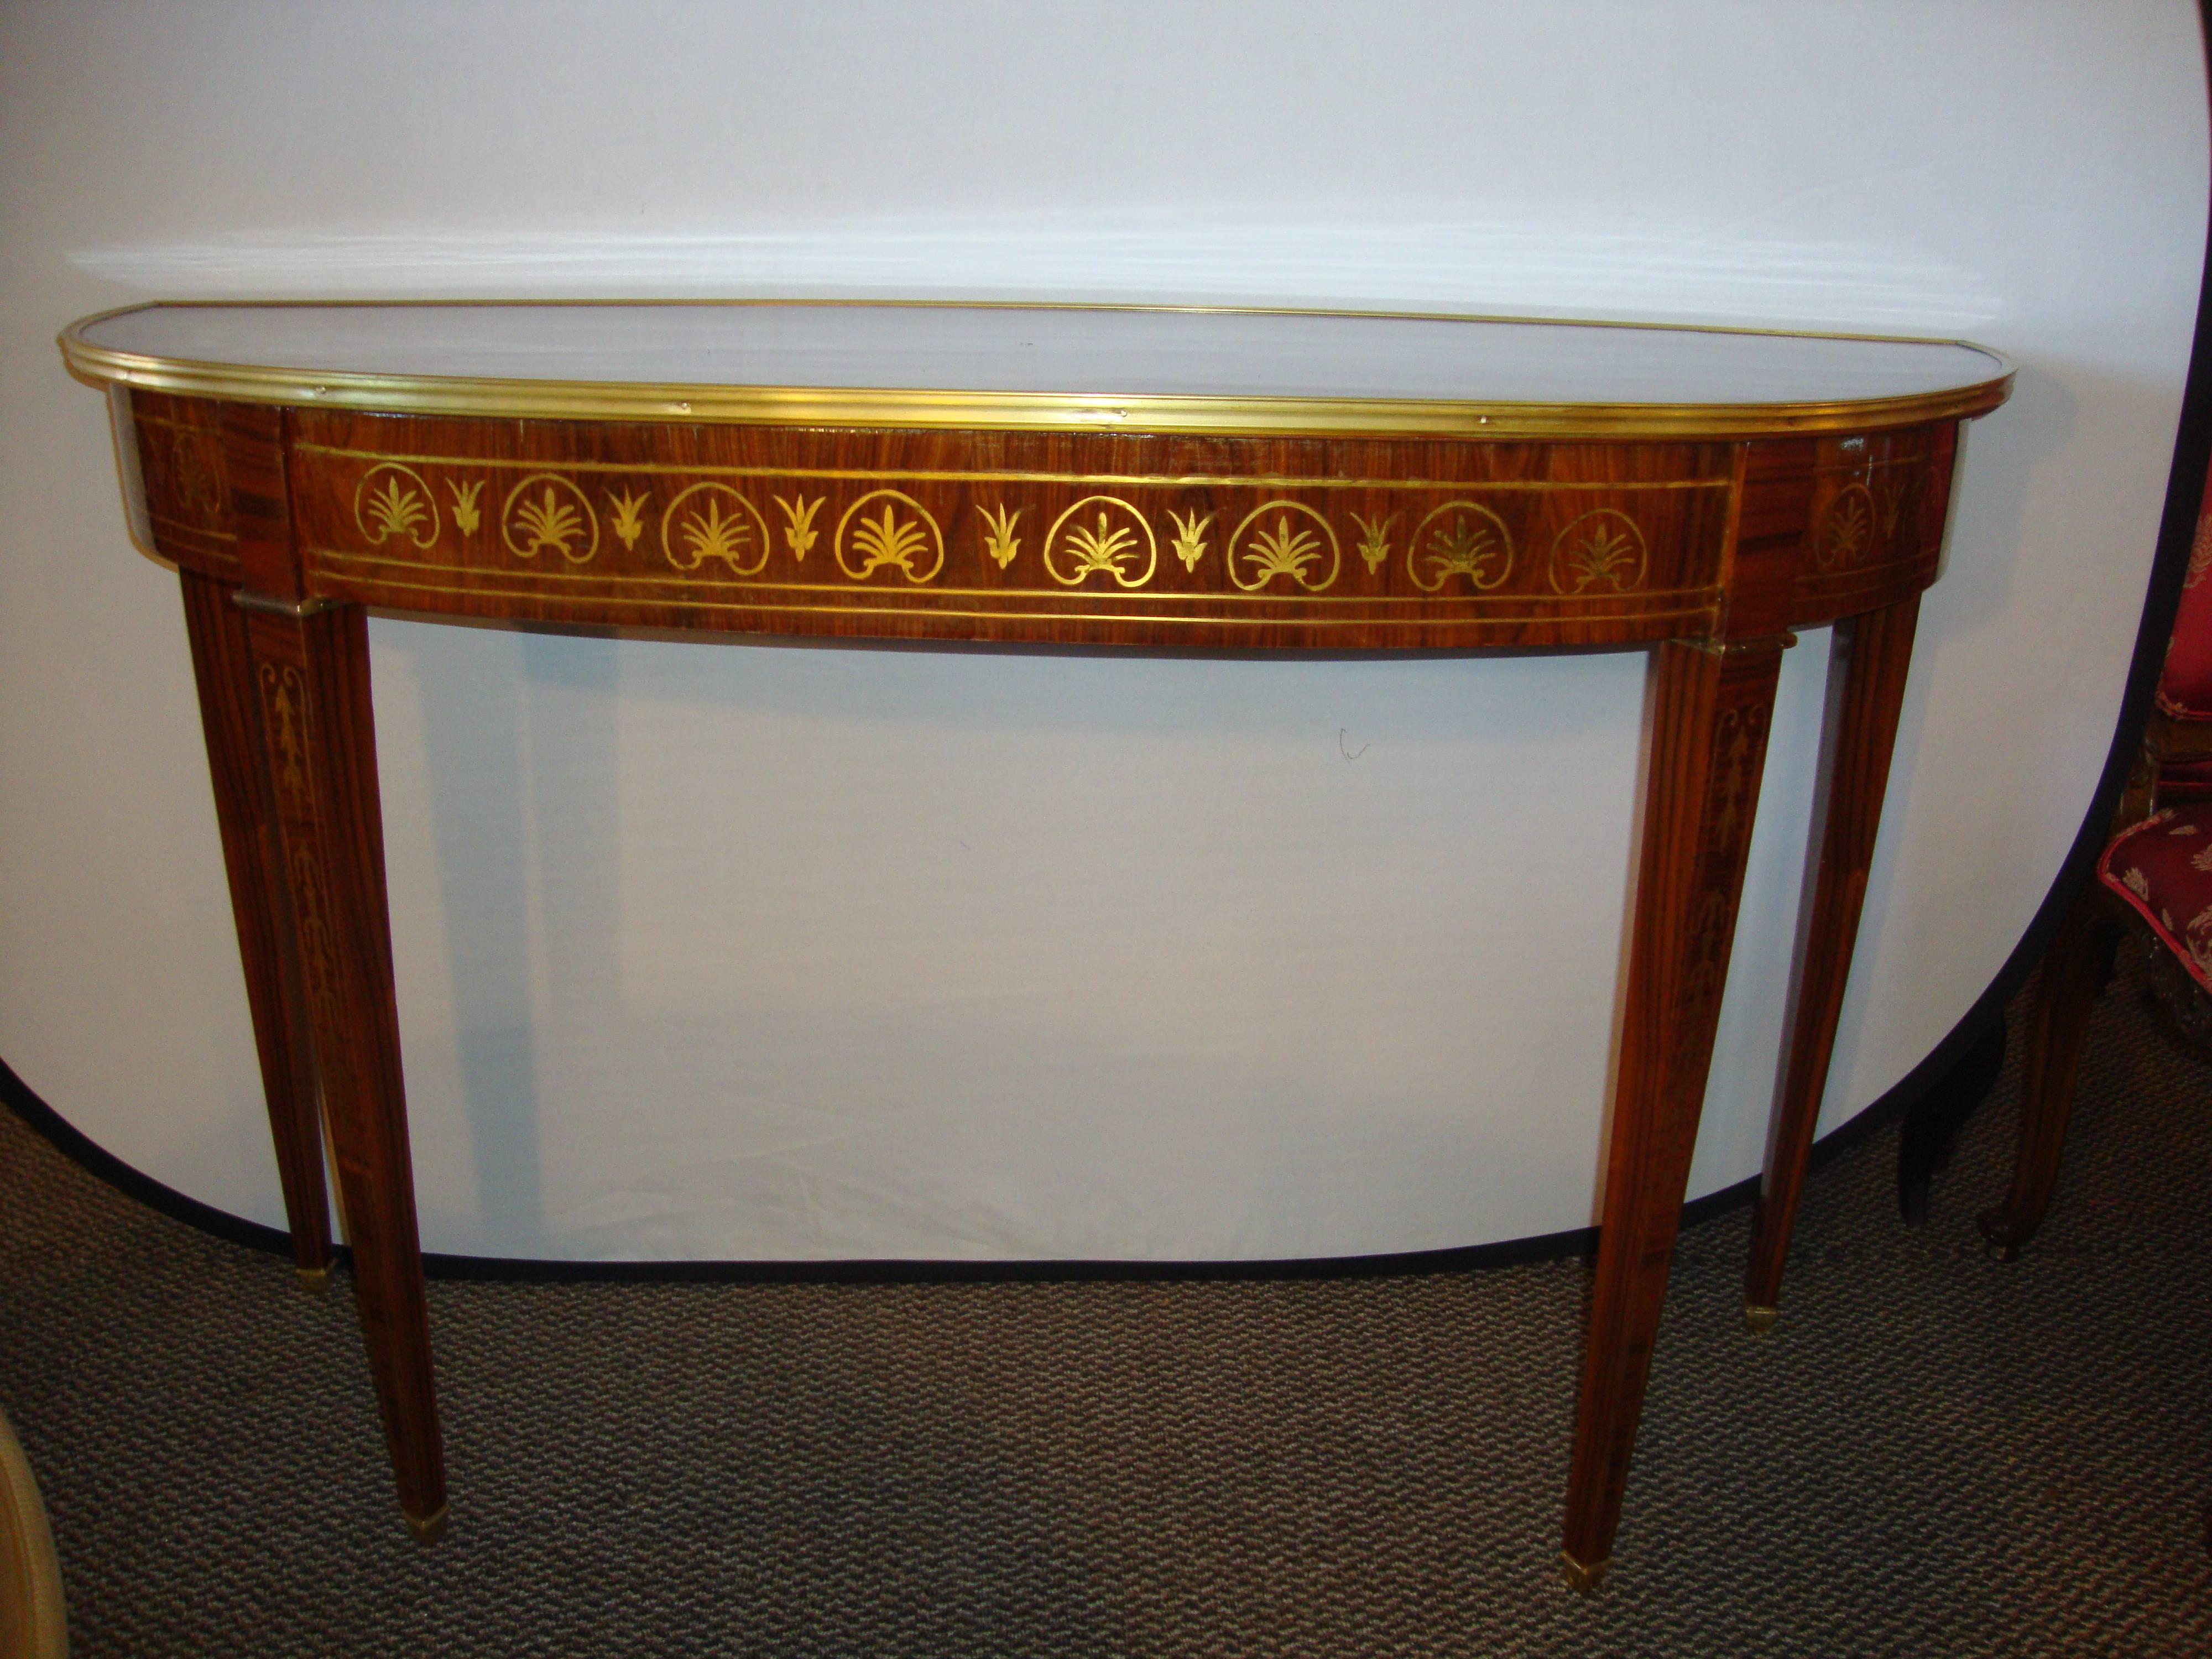 Finest Boulle inlaid demilune console. This recently polished, demilune console table with all-over boulle (brass) inlays. The tapering Louis XVI stylized legs with floral inlays supporting an apron of Fine brass inlays leading to a wonderful